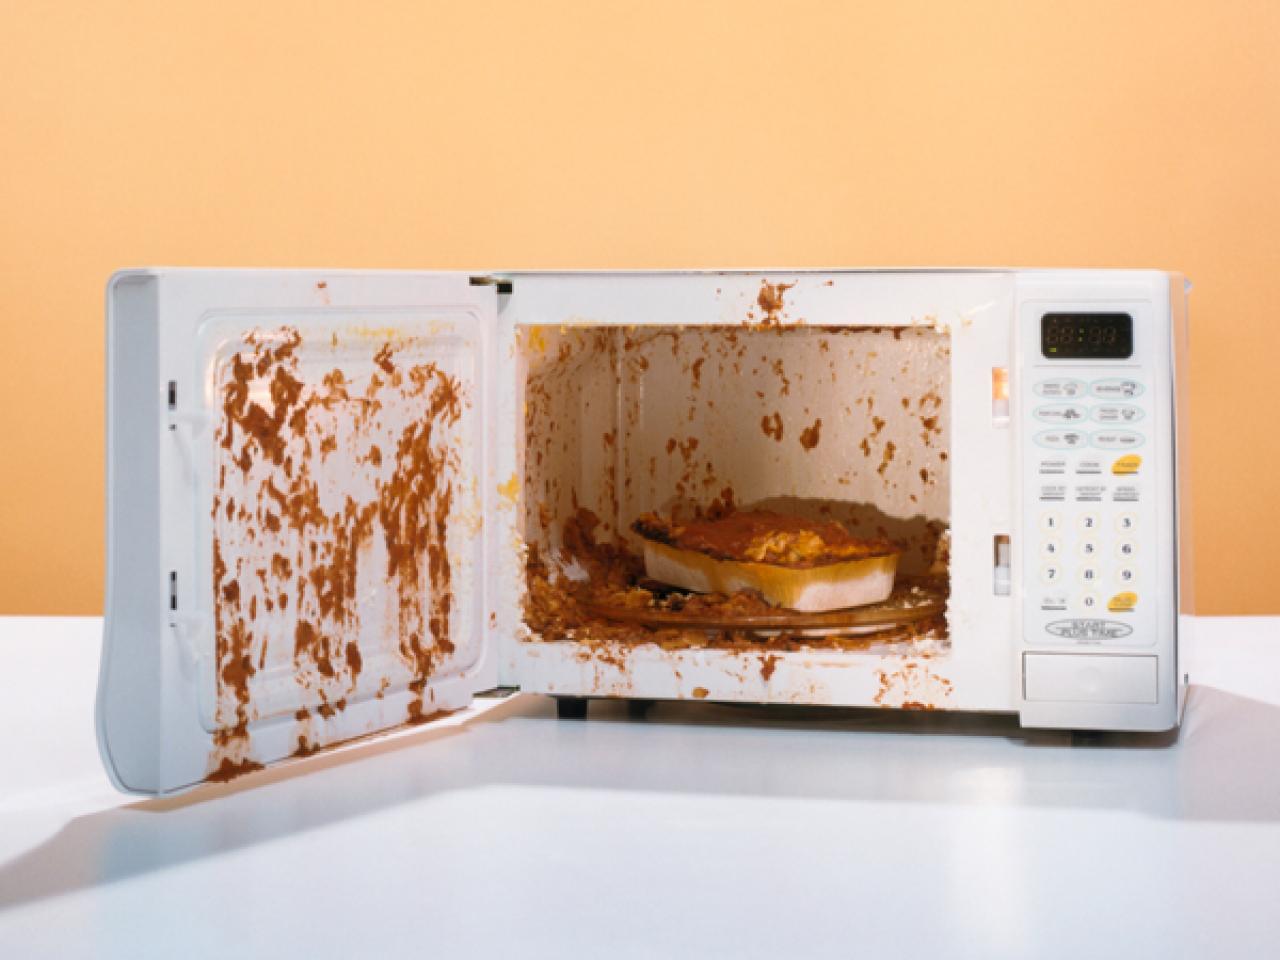 Many Europeans lack knowledge of proper microwave use